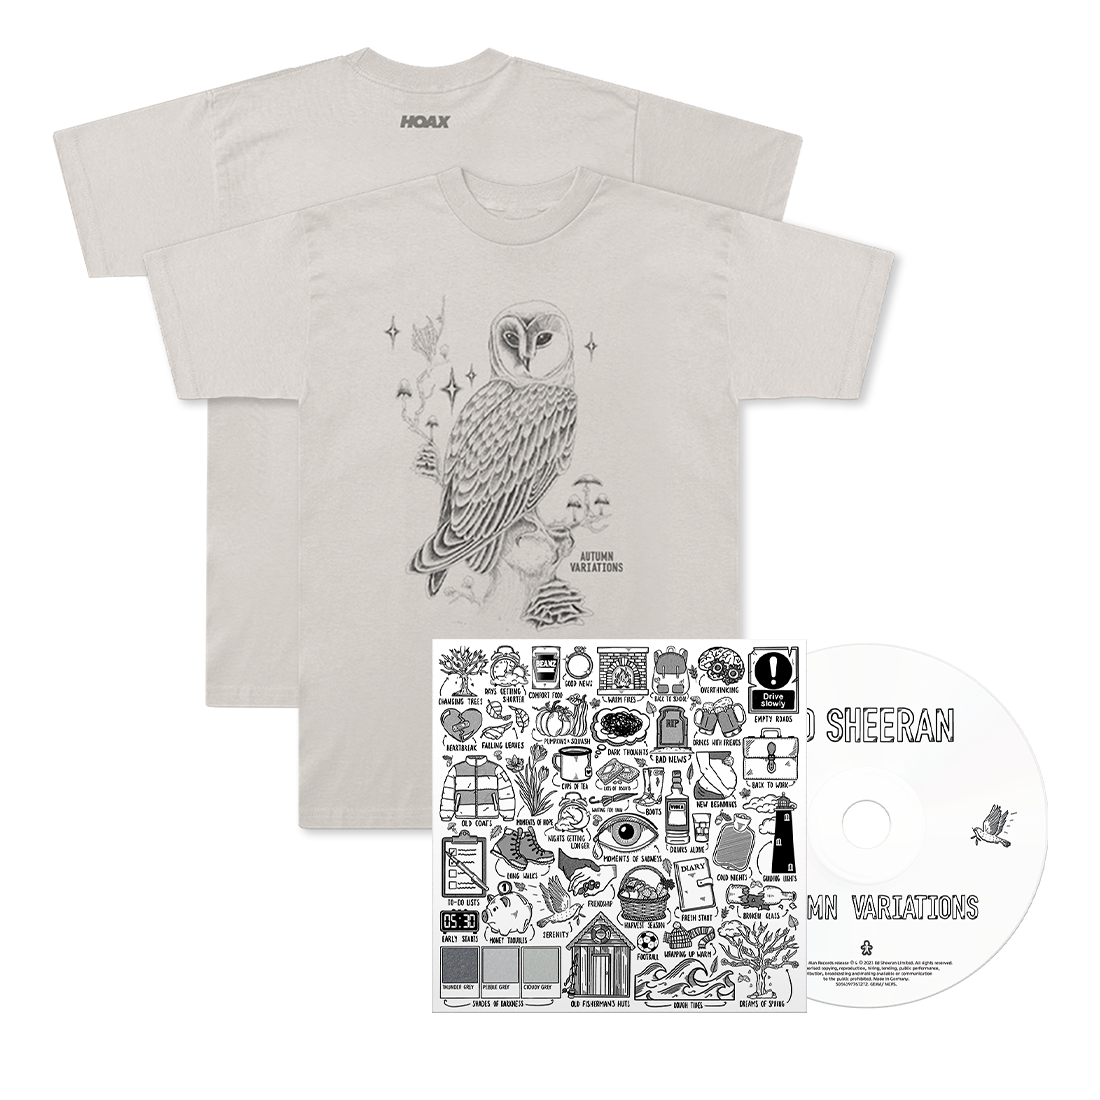 Autumn Variations CD and T-Shirt